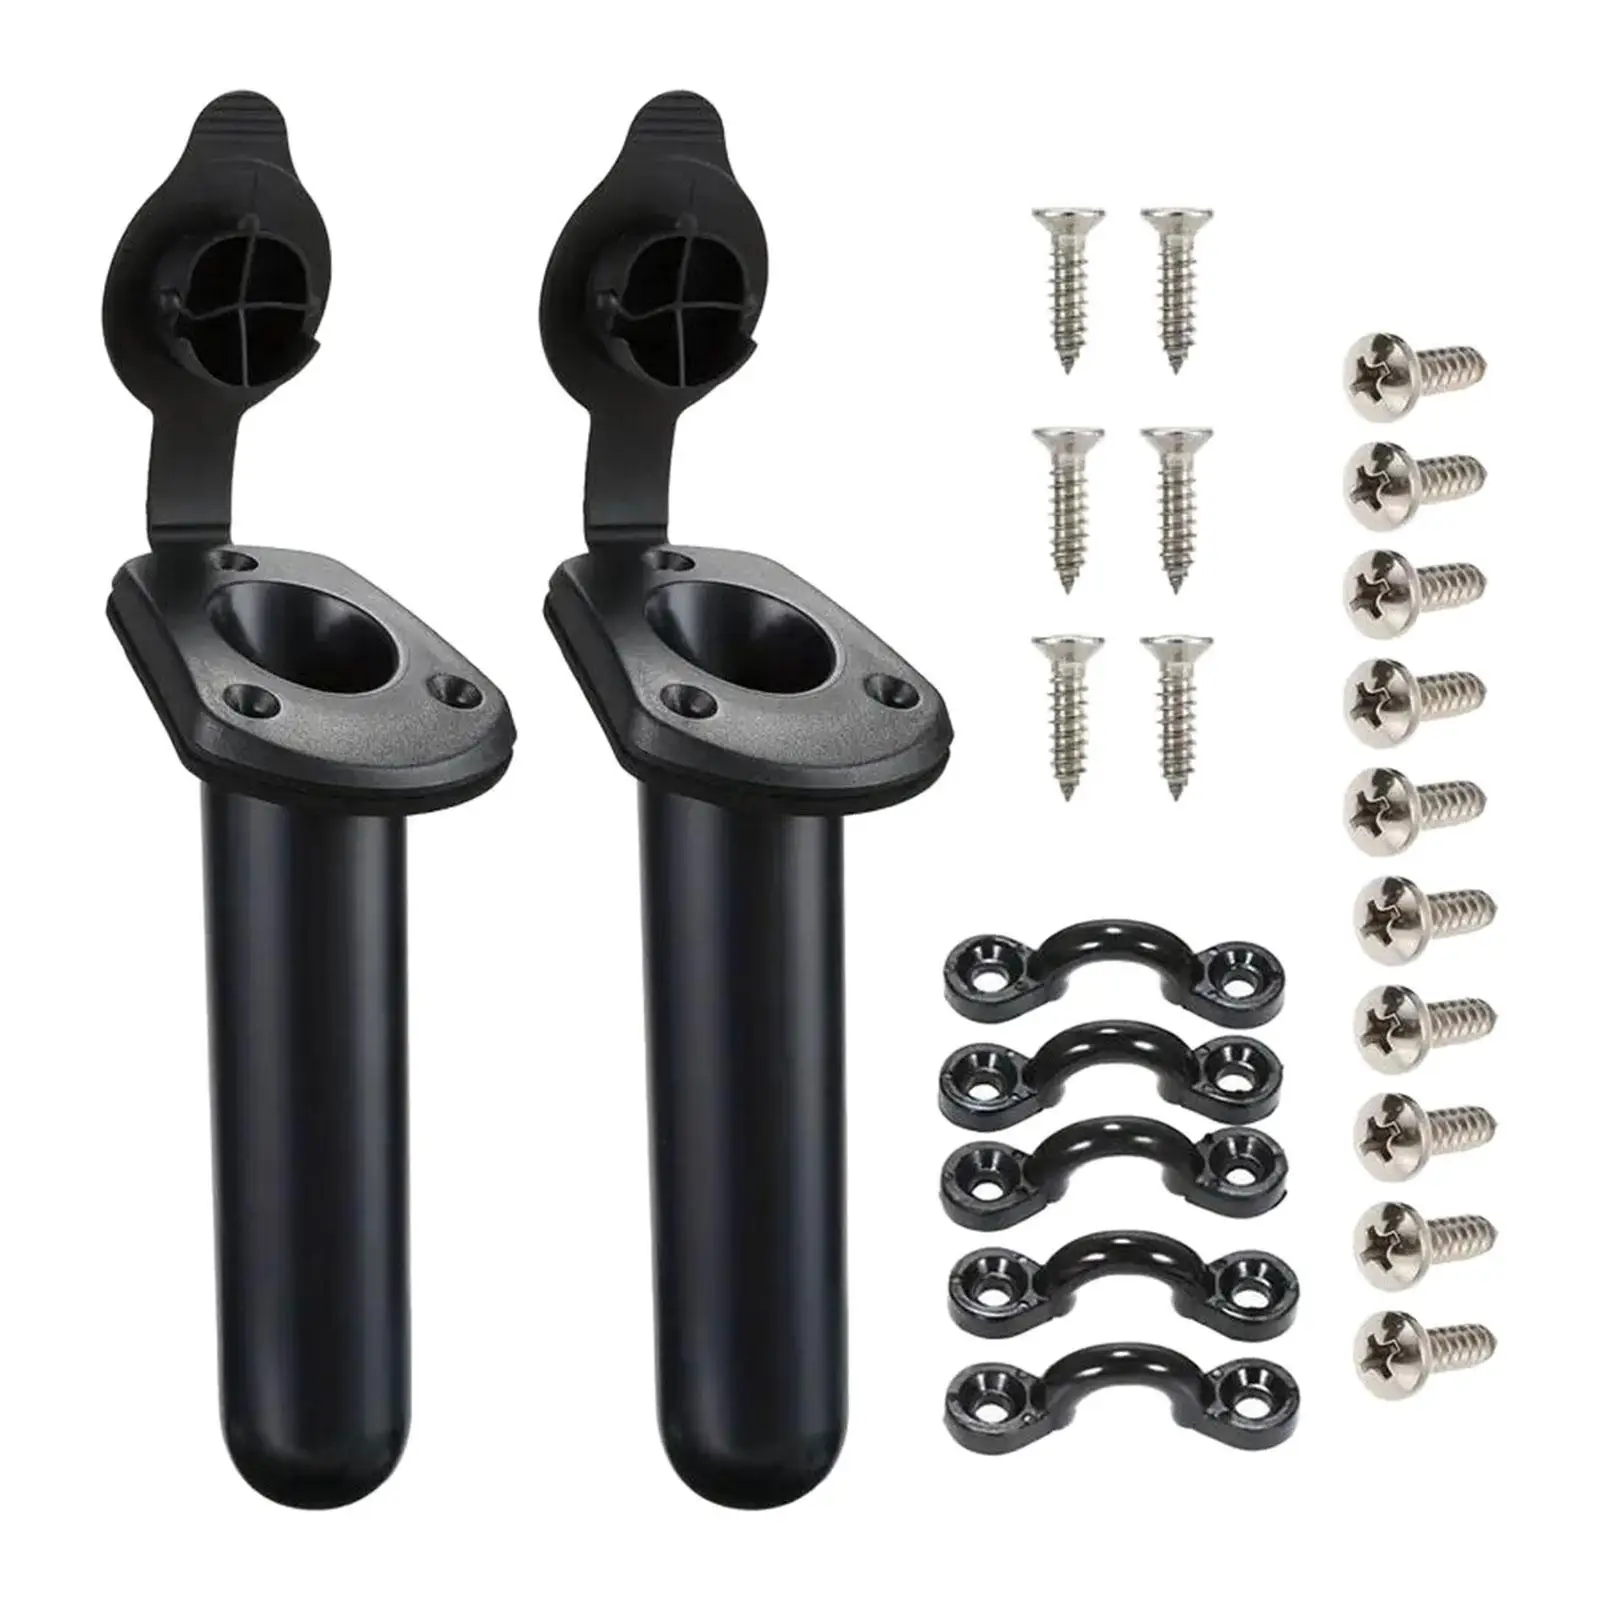 Kayak Fishing Rod Holder Easy Installation Repair Parts Replaces Fishing Tackle Accessory Tool for Canoe Kayak Fishing Boat